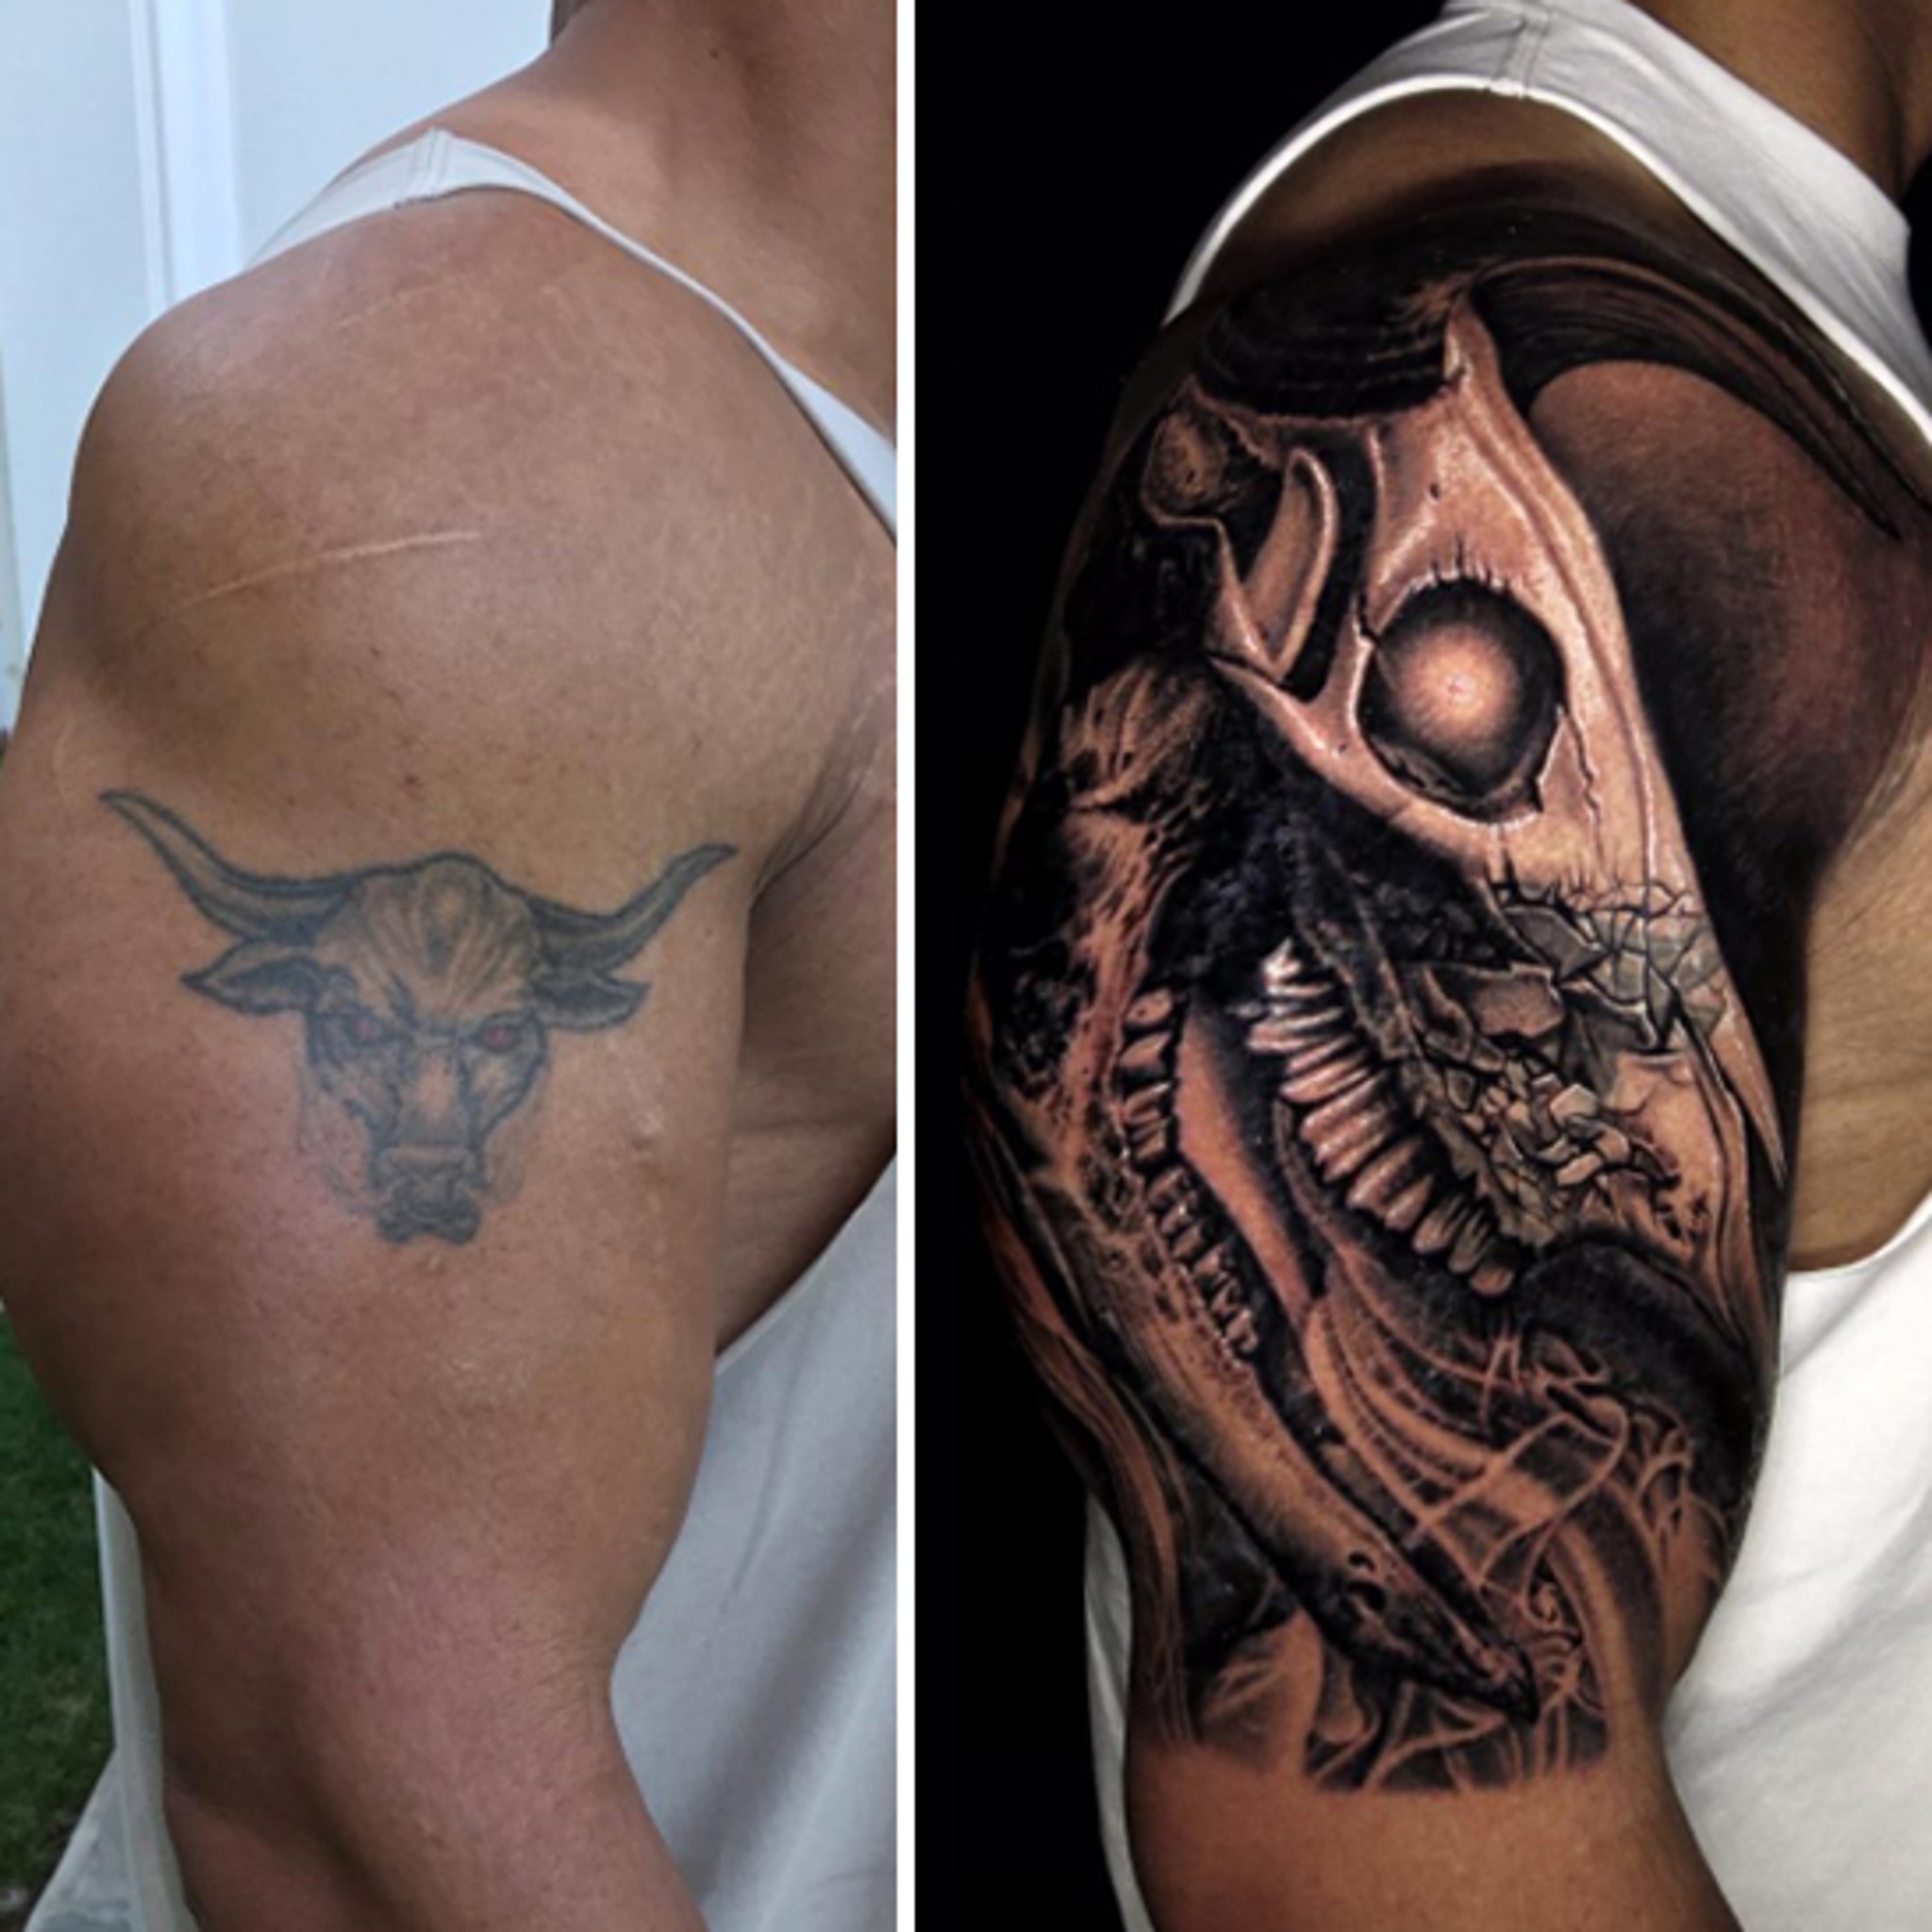 The Rock Covers Up Iconic Bull Tattoo with Bigger Bull Tattoo